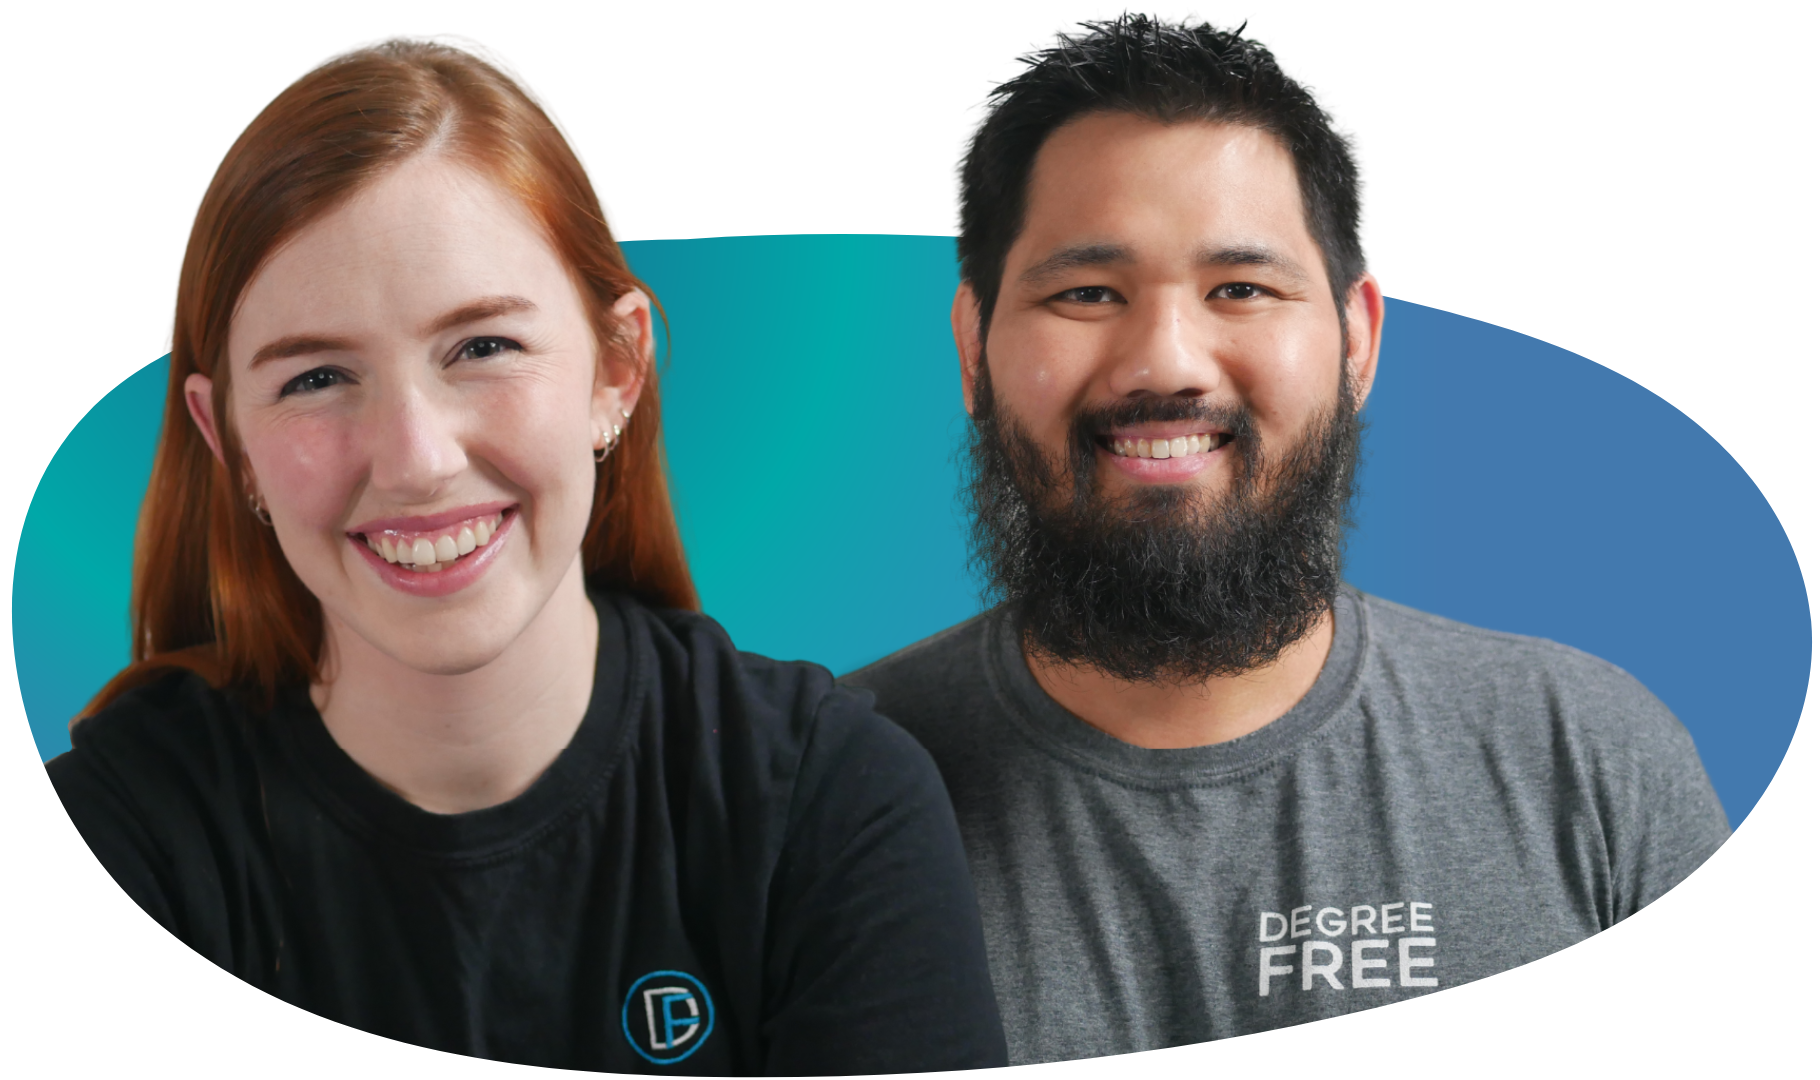 Ryan Maruyama and Hannah Maruyama from Degree Free with Blue Gradient Background